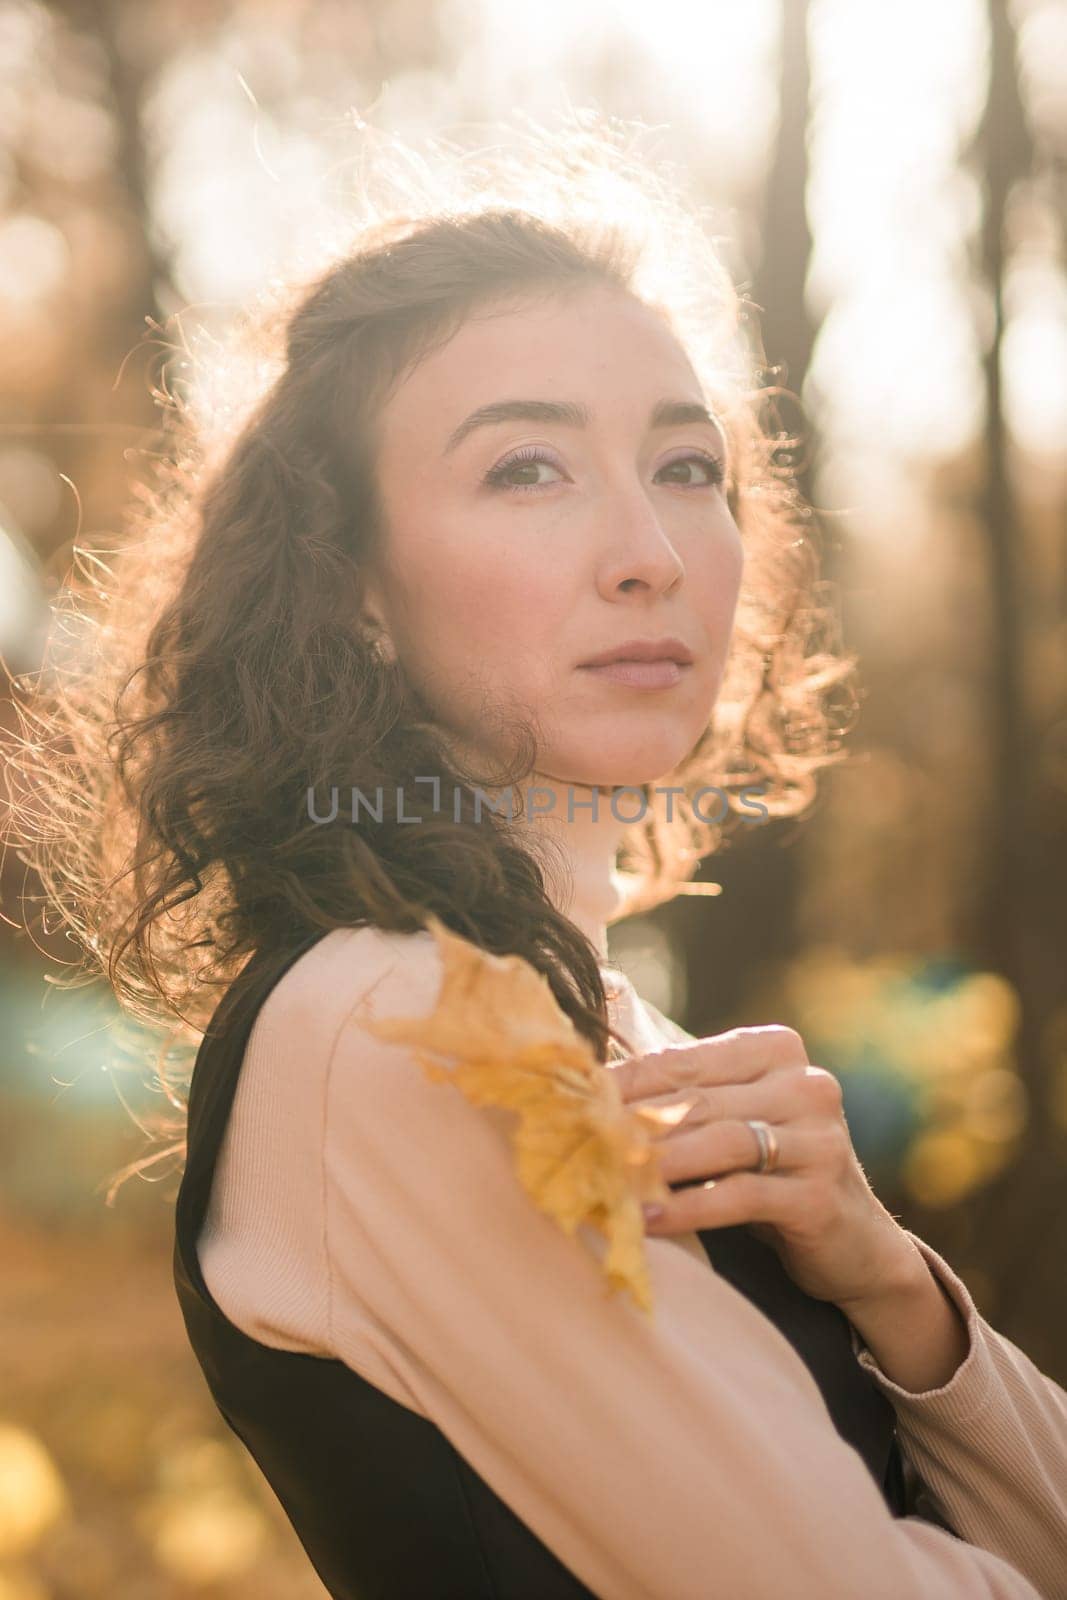 Portrait woman walking in autumn park, happy mood and fashion style trend and curly long brown hair copy space. Fall season and pretty female portrait copy space. Millennial generation concept by Satura86